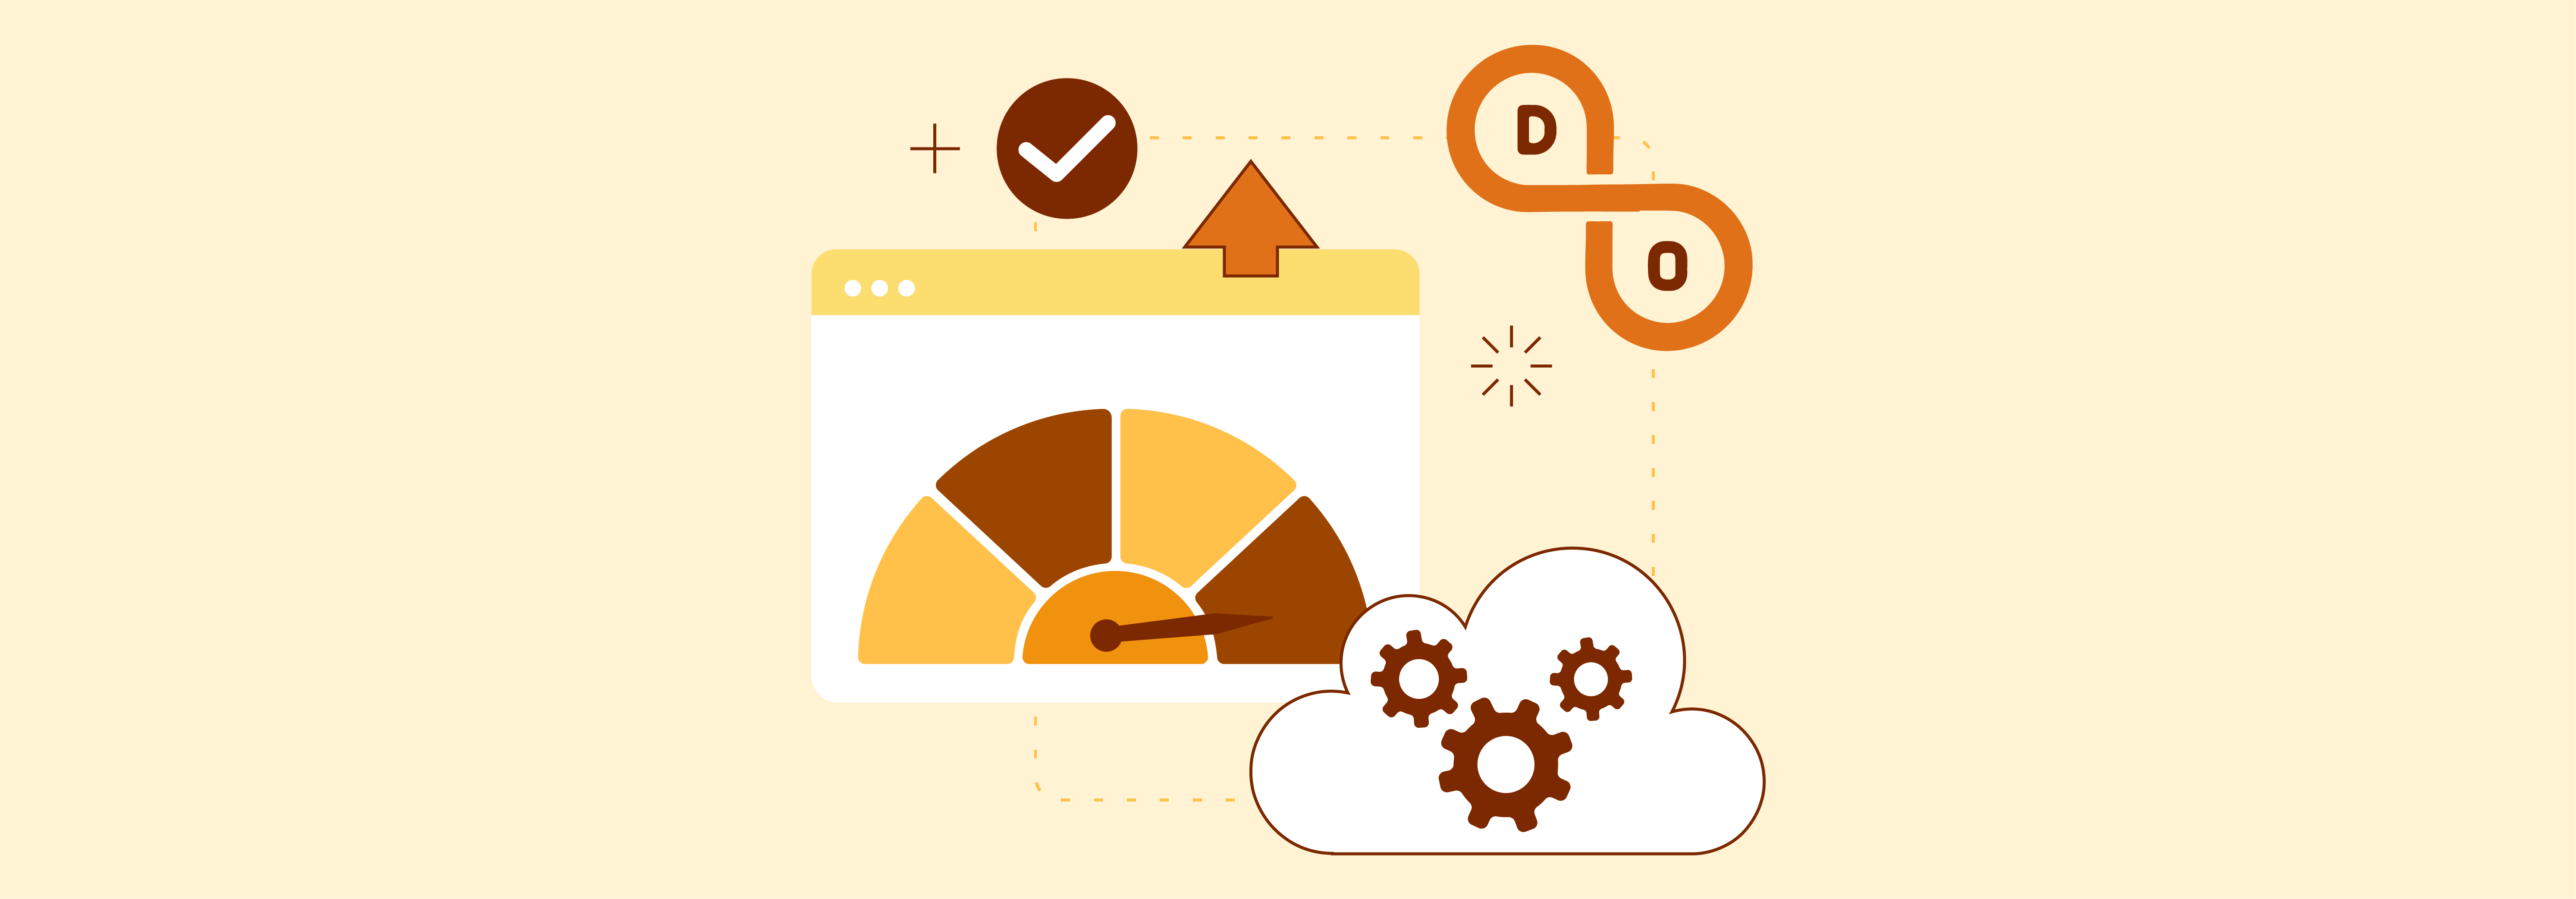 DevOps and Site management features of Magento 1 cloud hosting